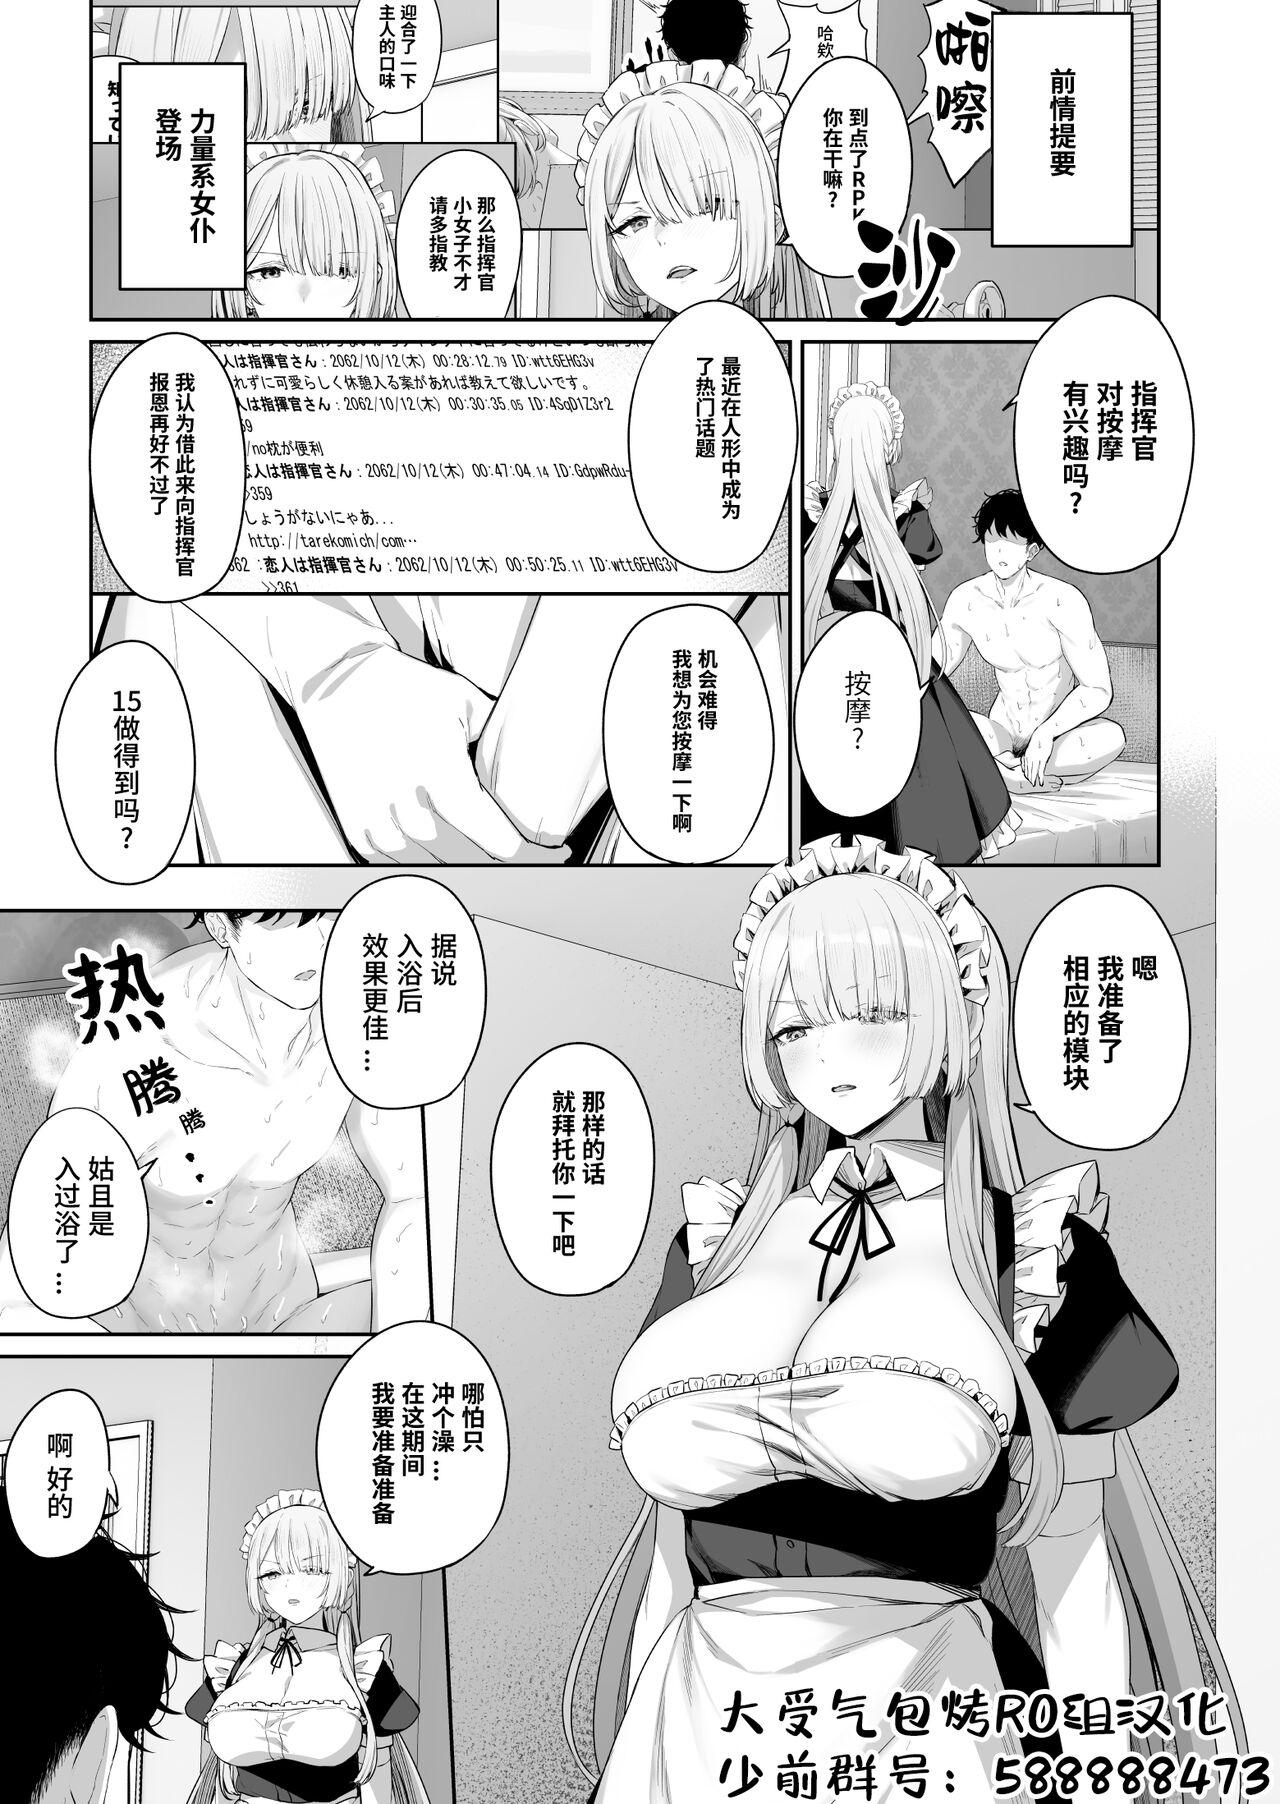 Pussylick AK15の進捗1 - Girls frontline Girl - Page 1